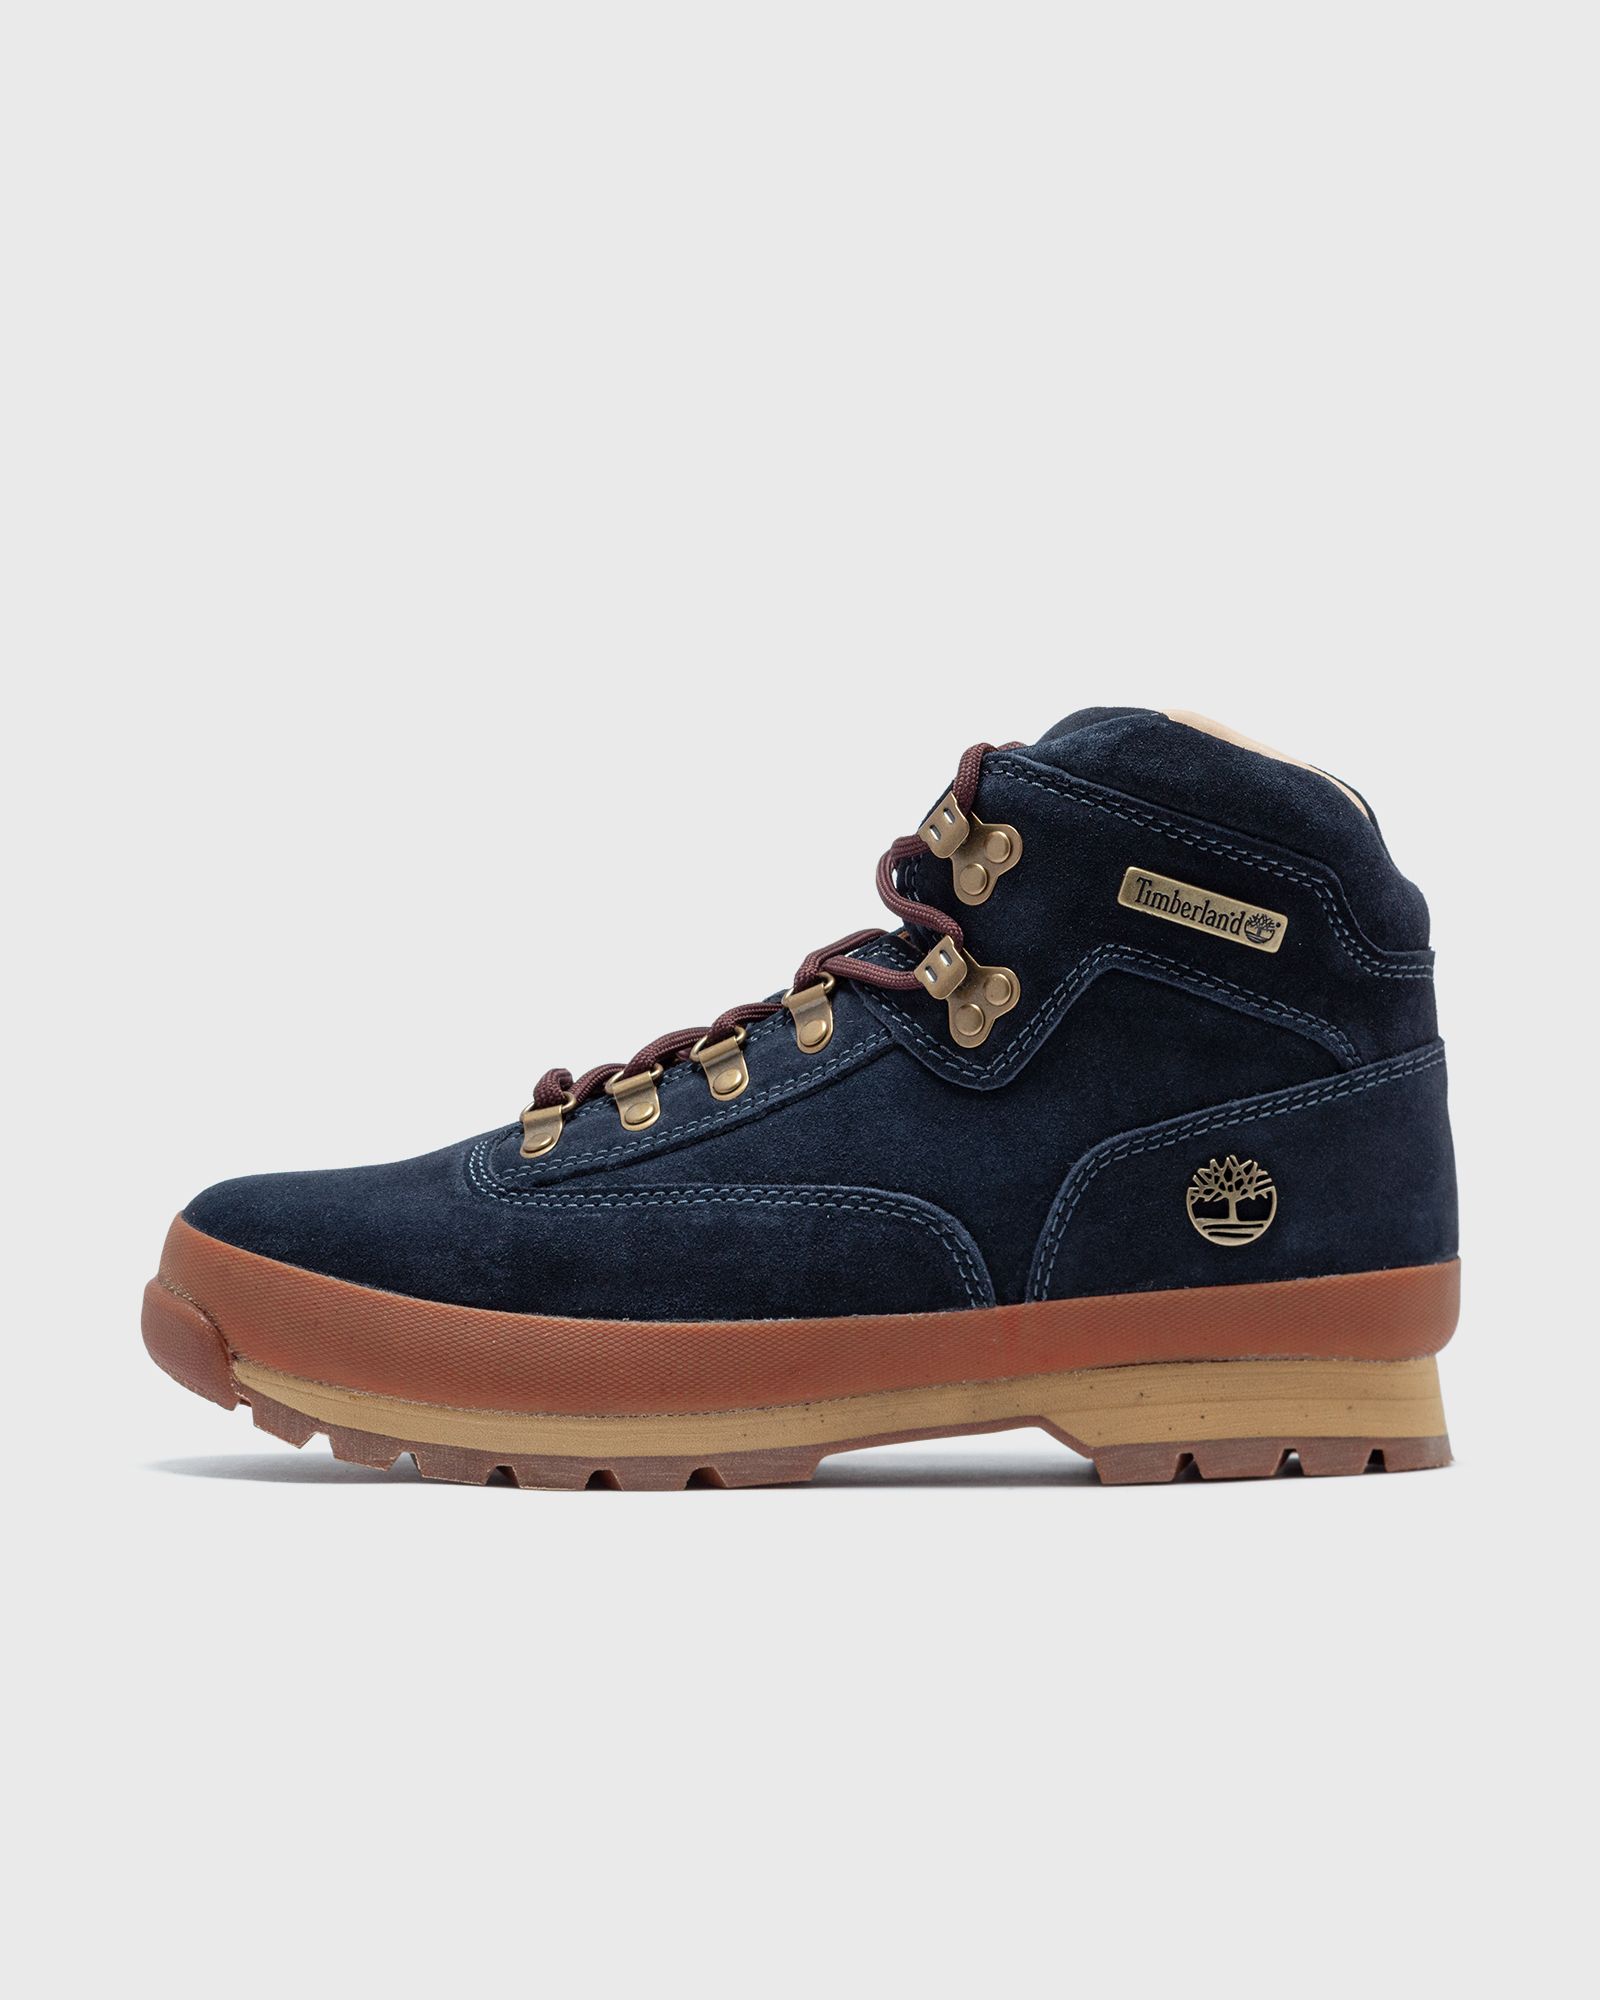 Timberland - euro hiker mid lace up boot men boots blue in größe:41,5